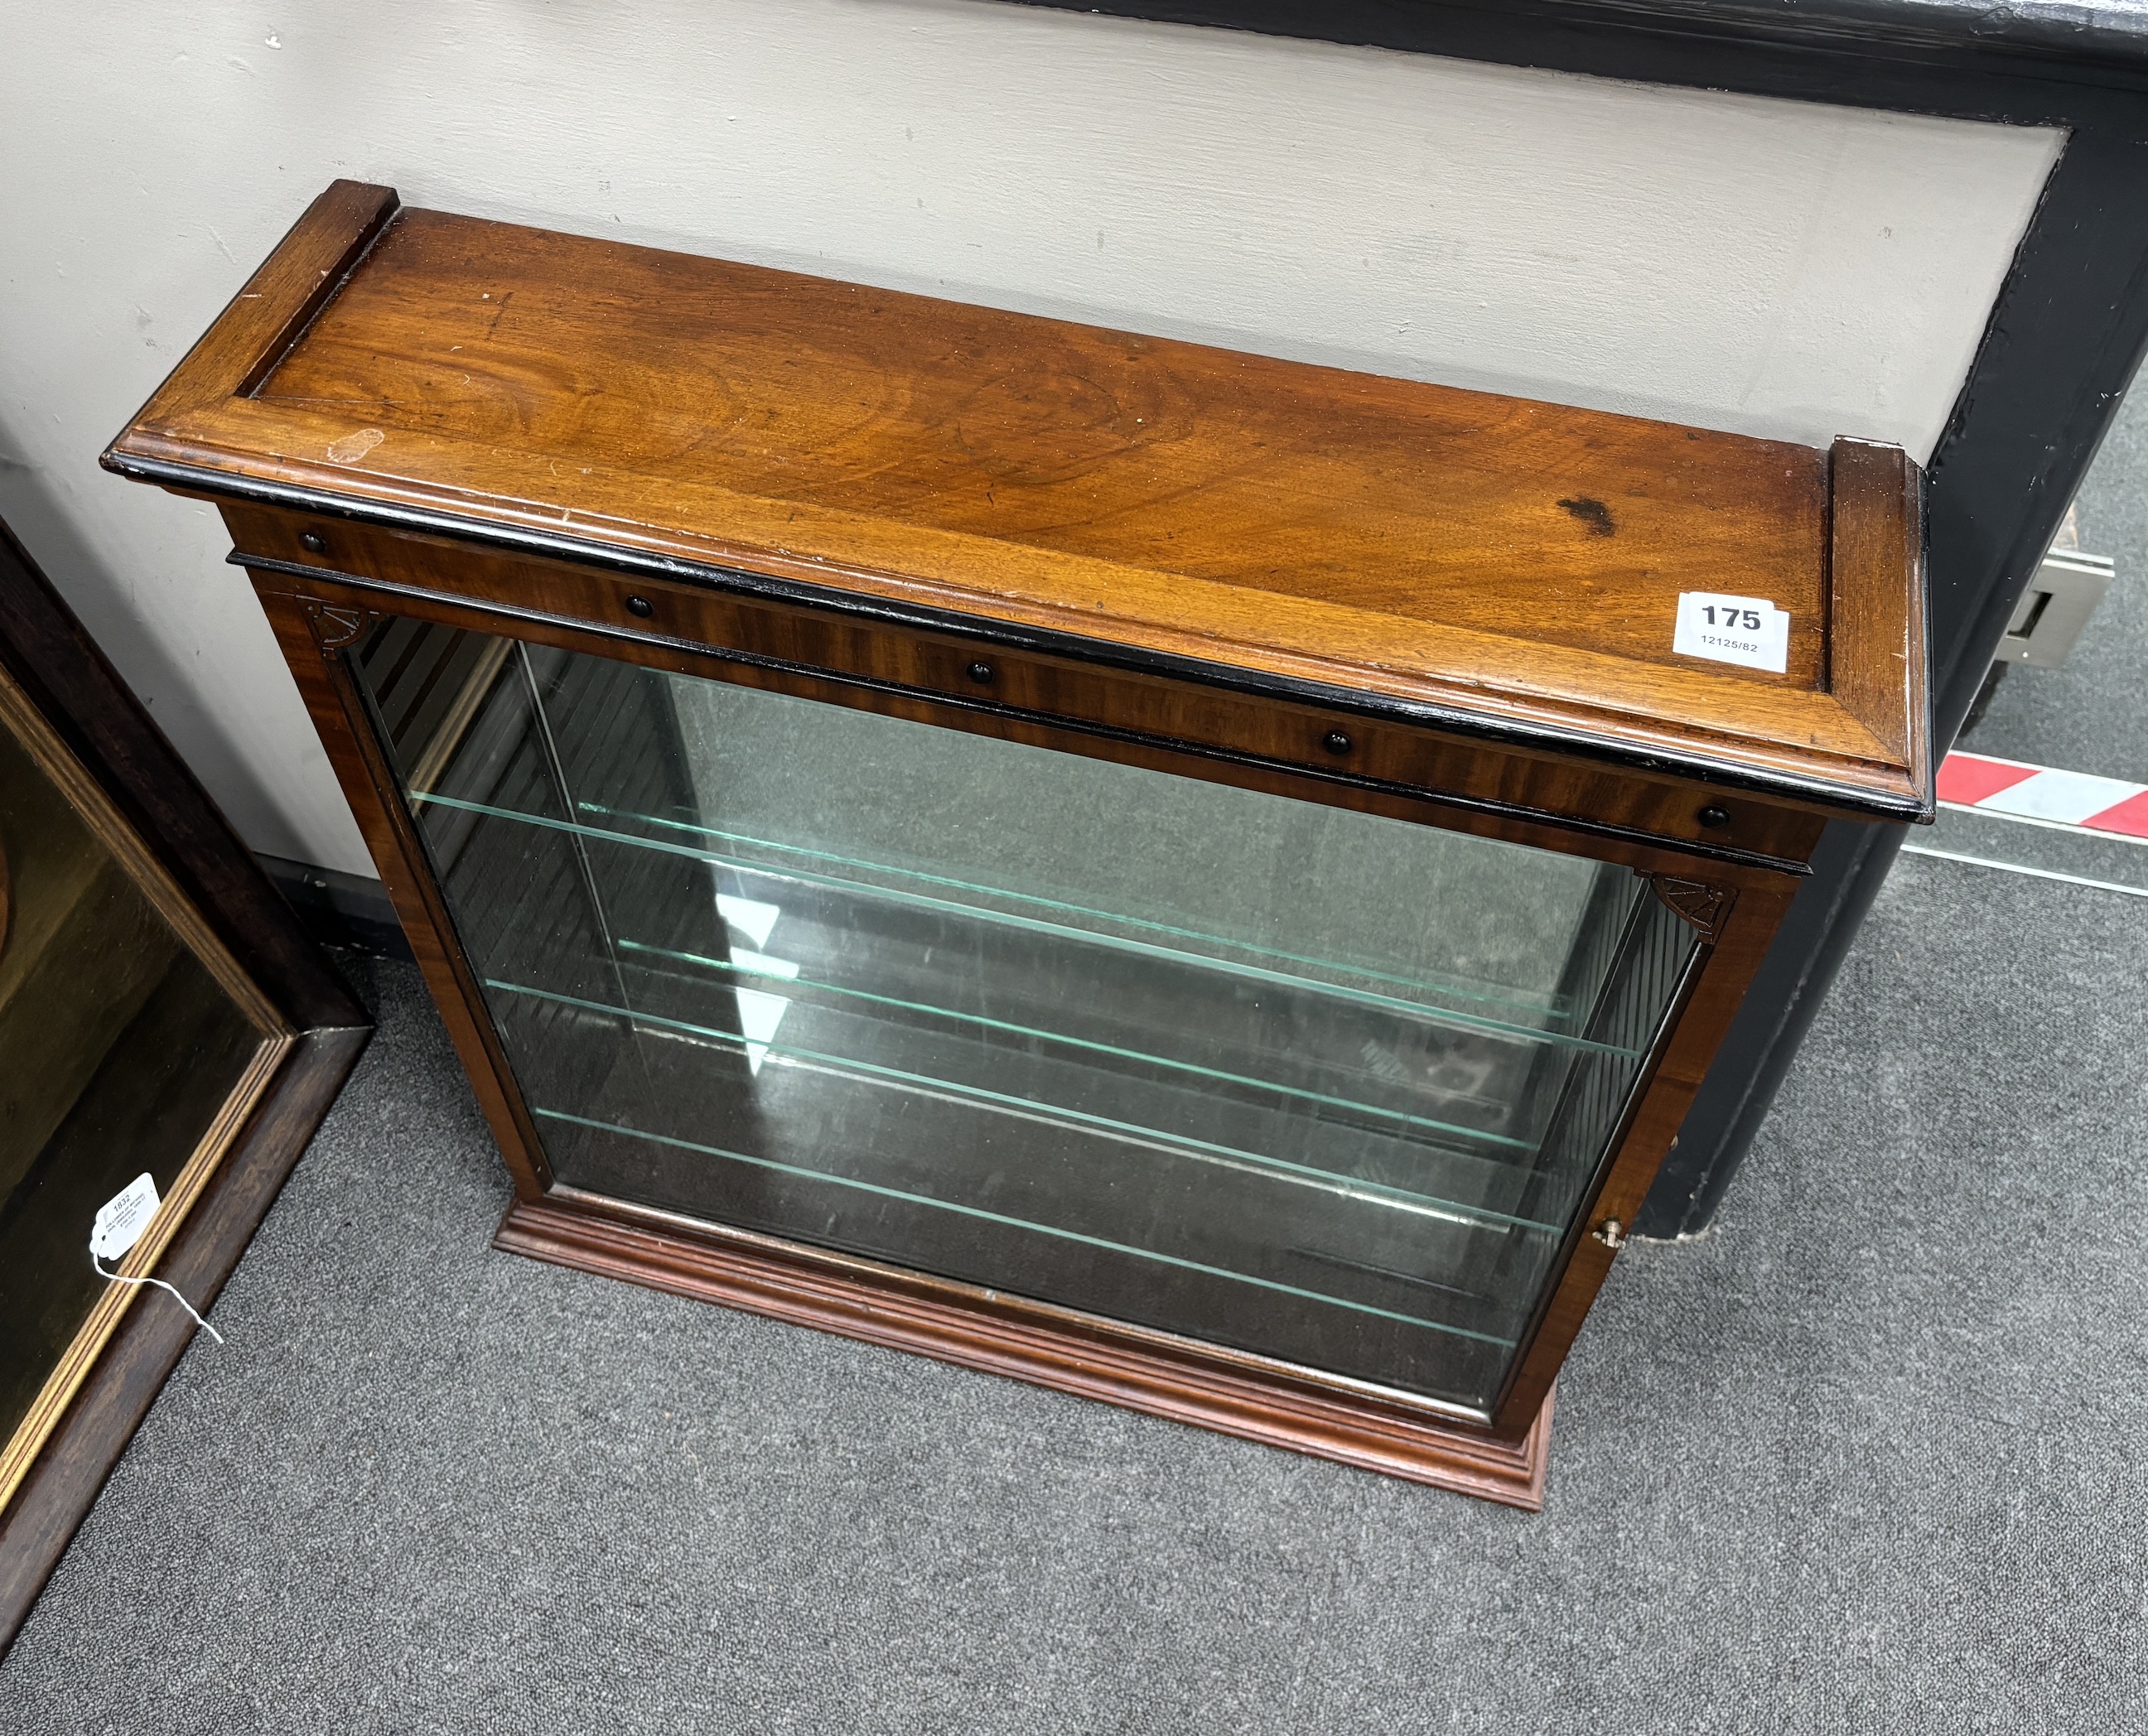 A Victorian mahogany mirrored wall cabinet, width 70cm, depth 18cm, height 70cm